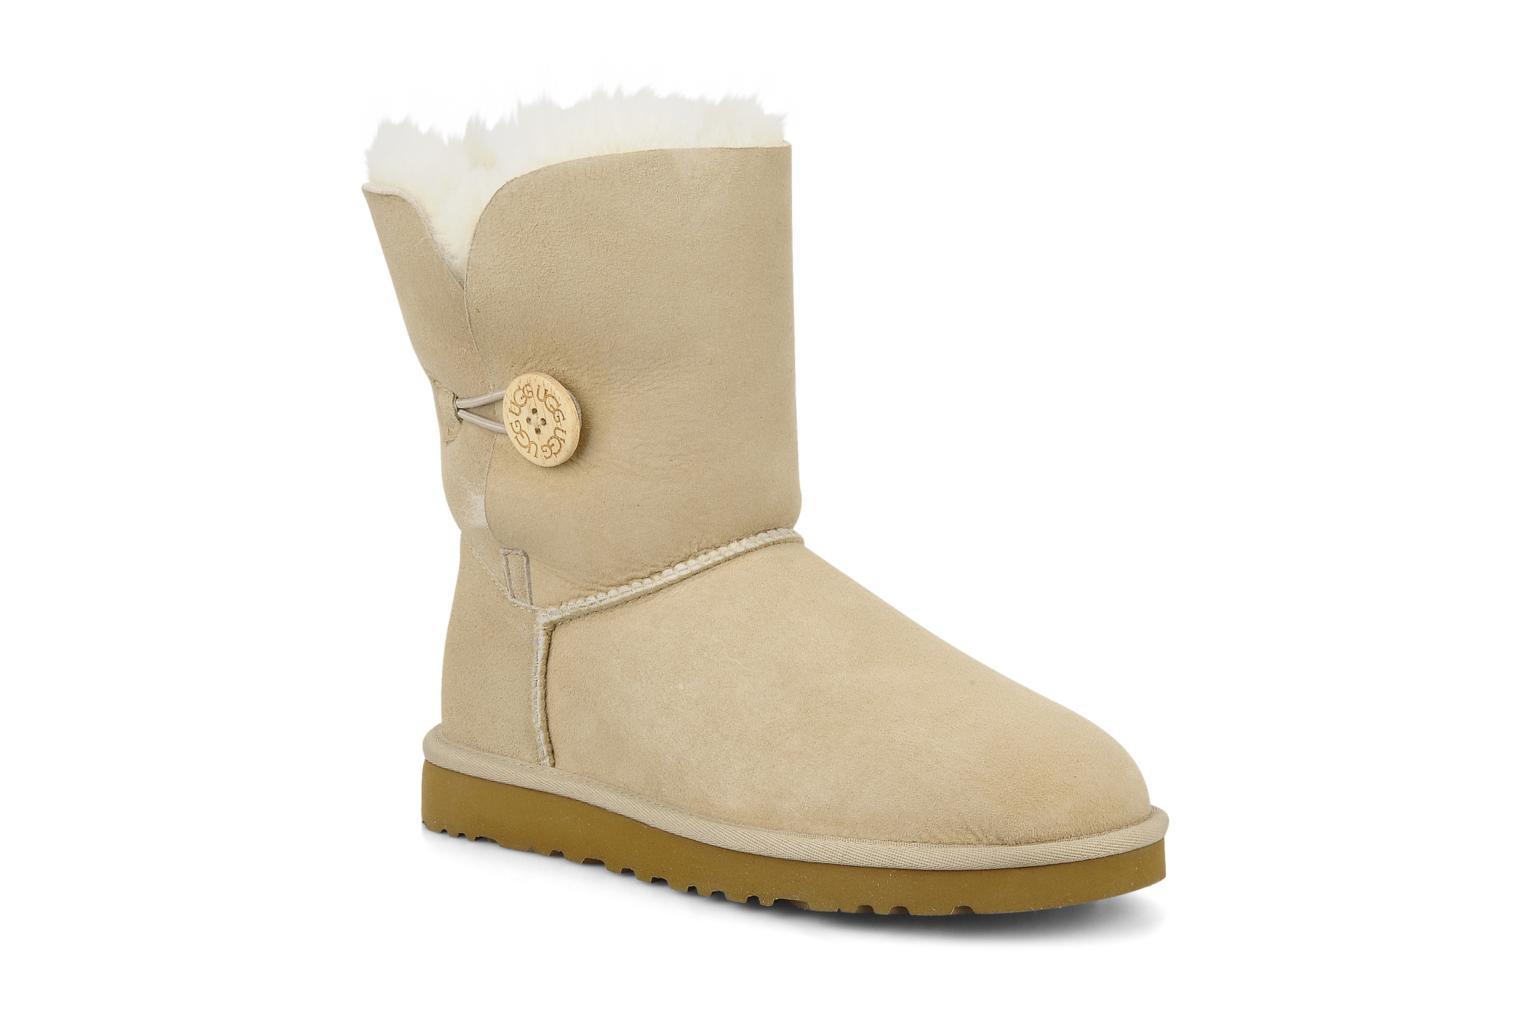 Foto Boots y Botines Ugg Australia Bailey Button Mujer